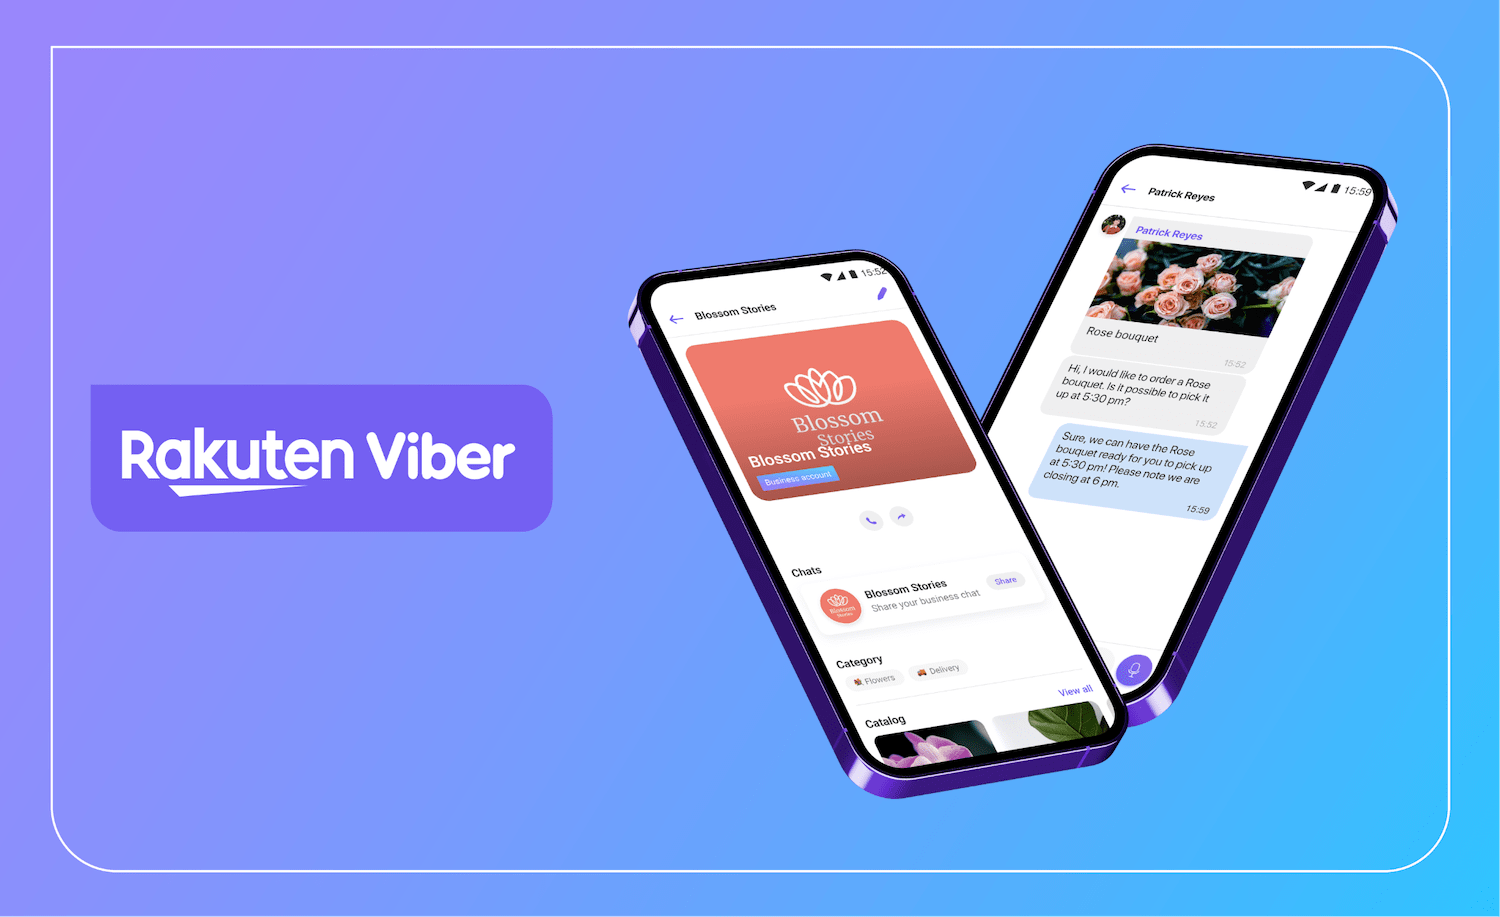 Rakuten Viber has taken a significant leap forward in its global strategy by launching a new suite of business tools, expanding Viber’s capabilities.